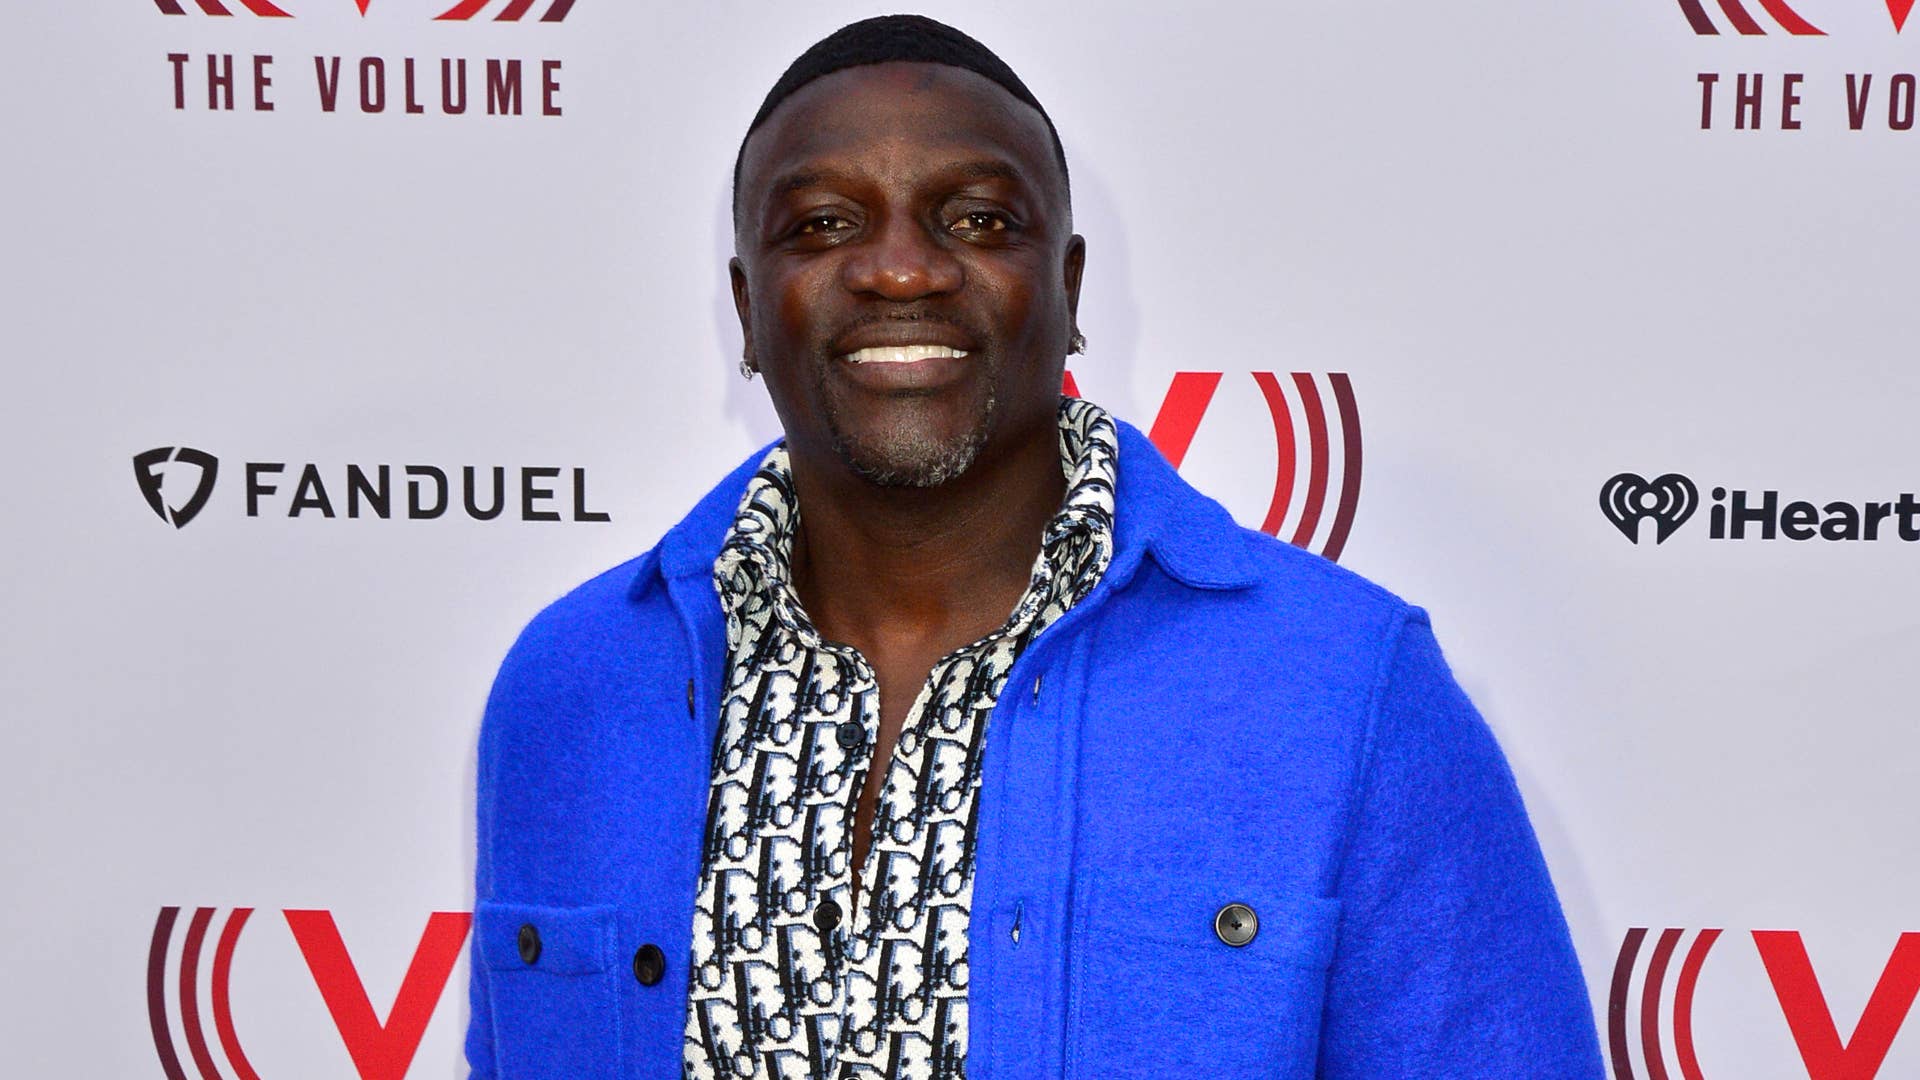 Akon is seen on the red carpet for a special event